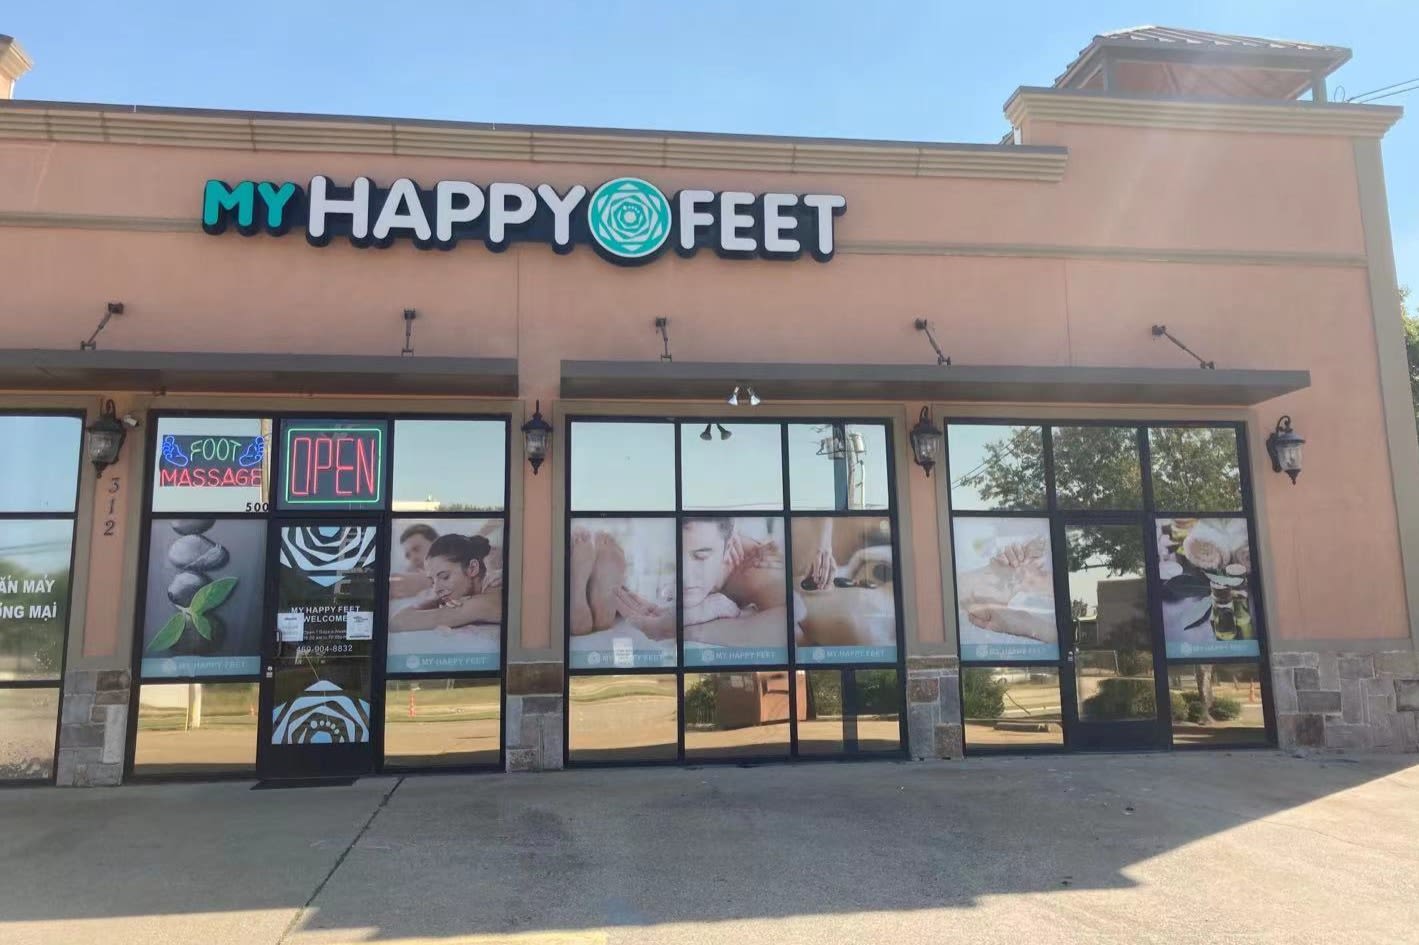 My Happy Feet Read Reviews And Book Classes On Classpass